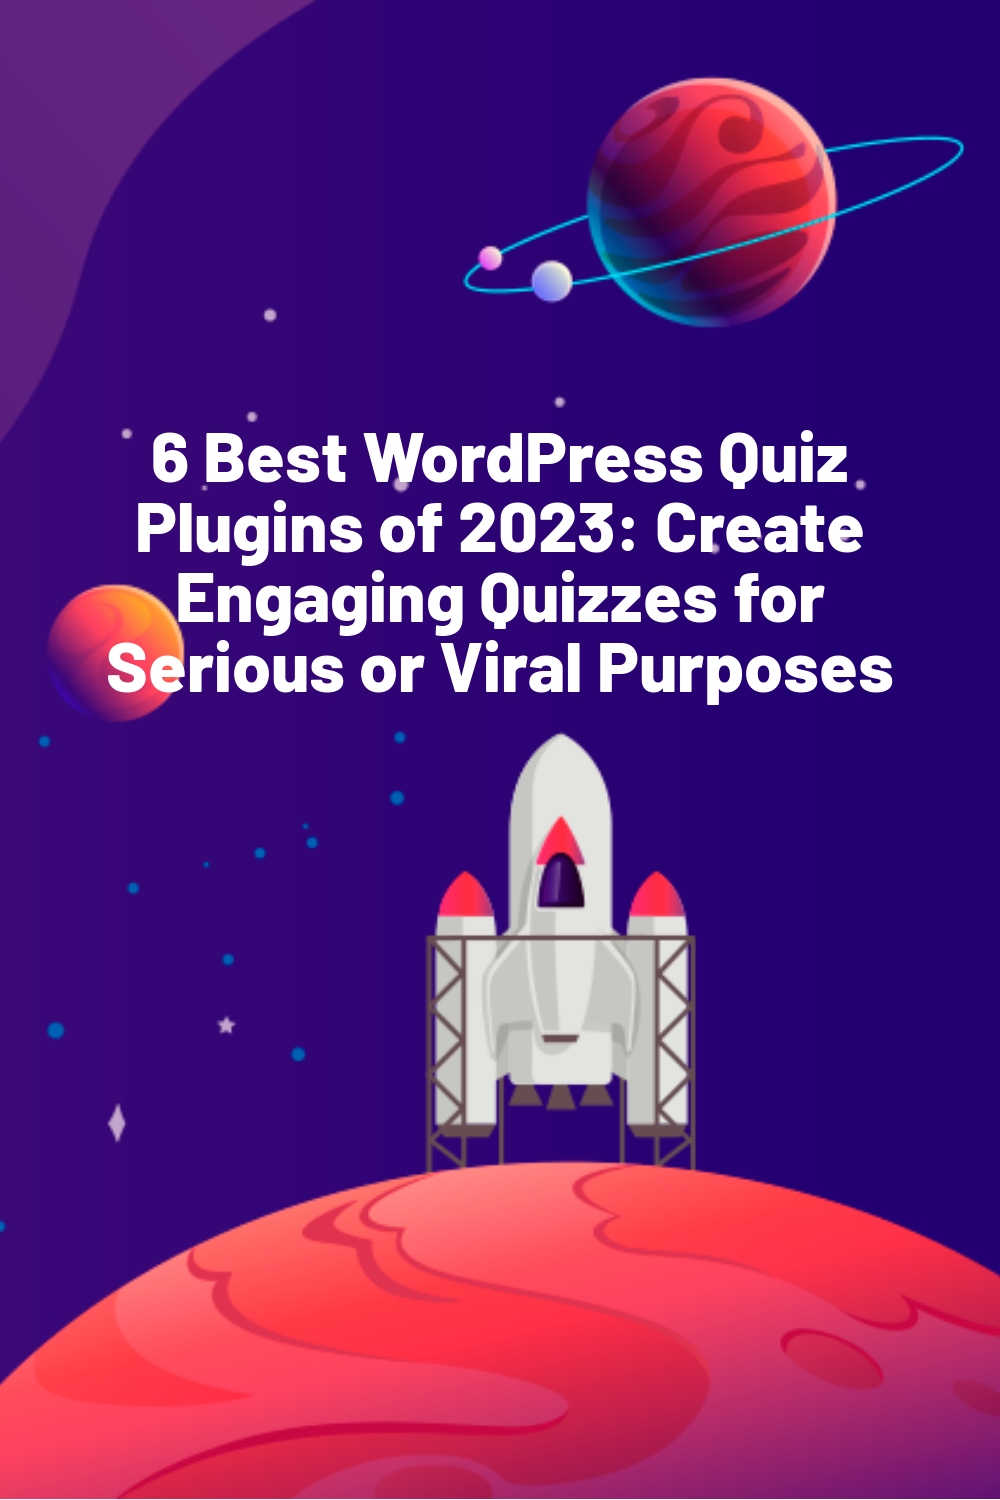 6 Best WordPress Quiz Plugins of 2023: Create Engaging Quizzes for Serious or Viral Purposes